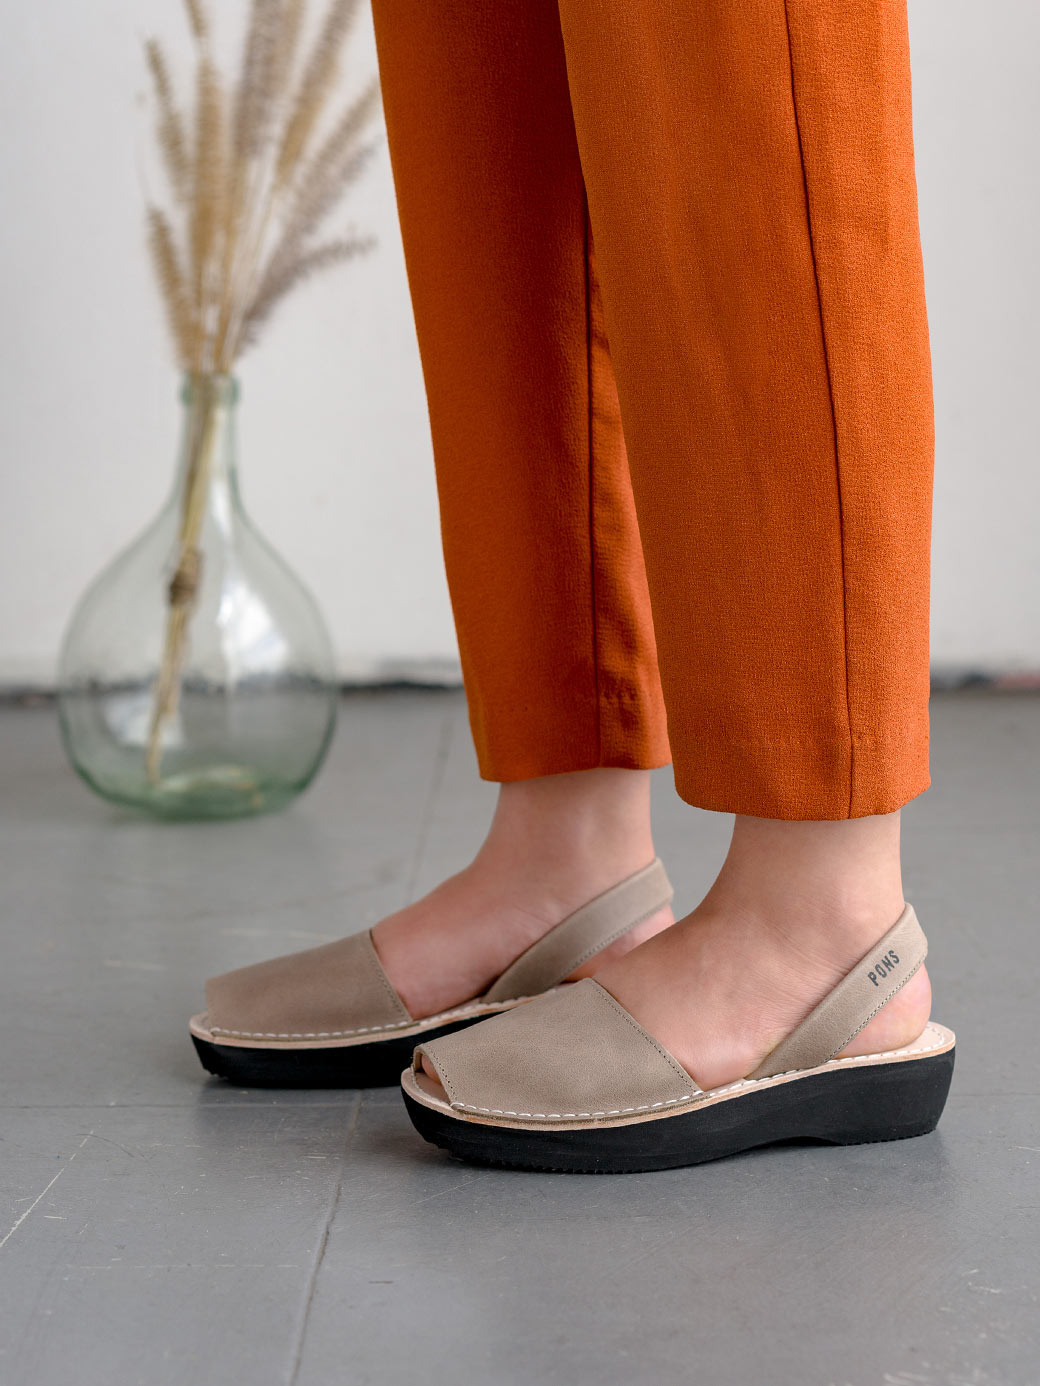 Classic Taupe Platform Pons Shoes lifestyle